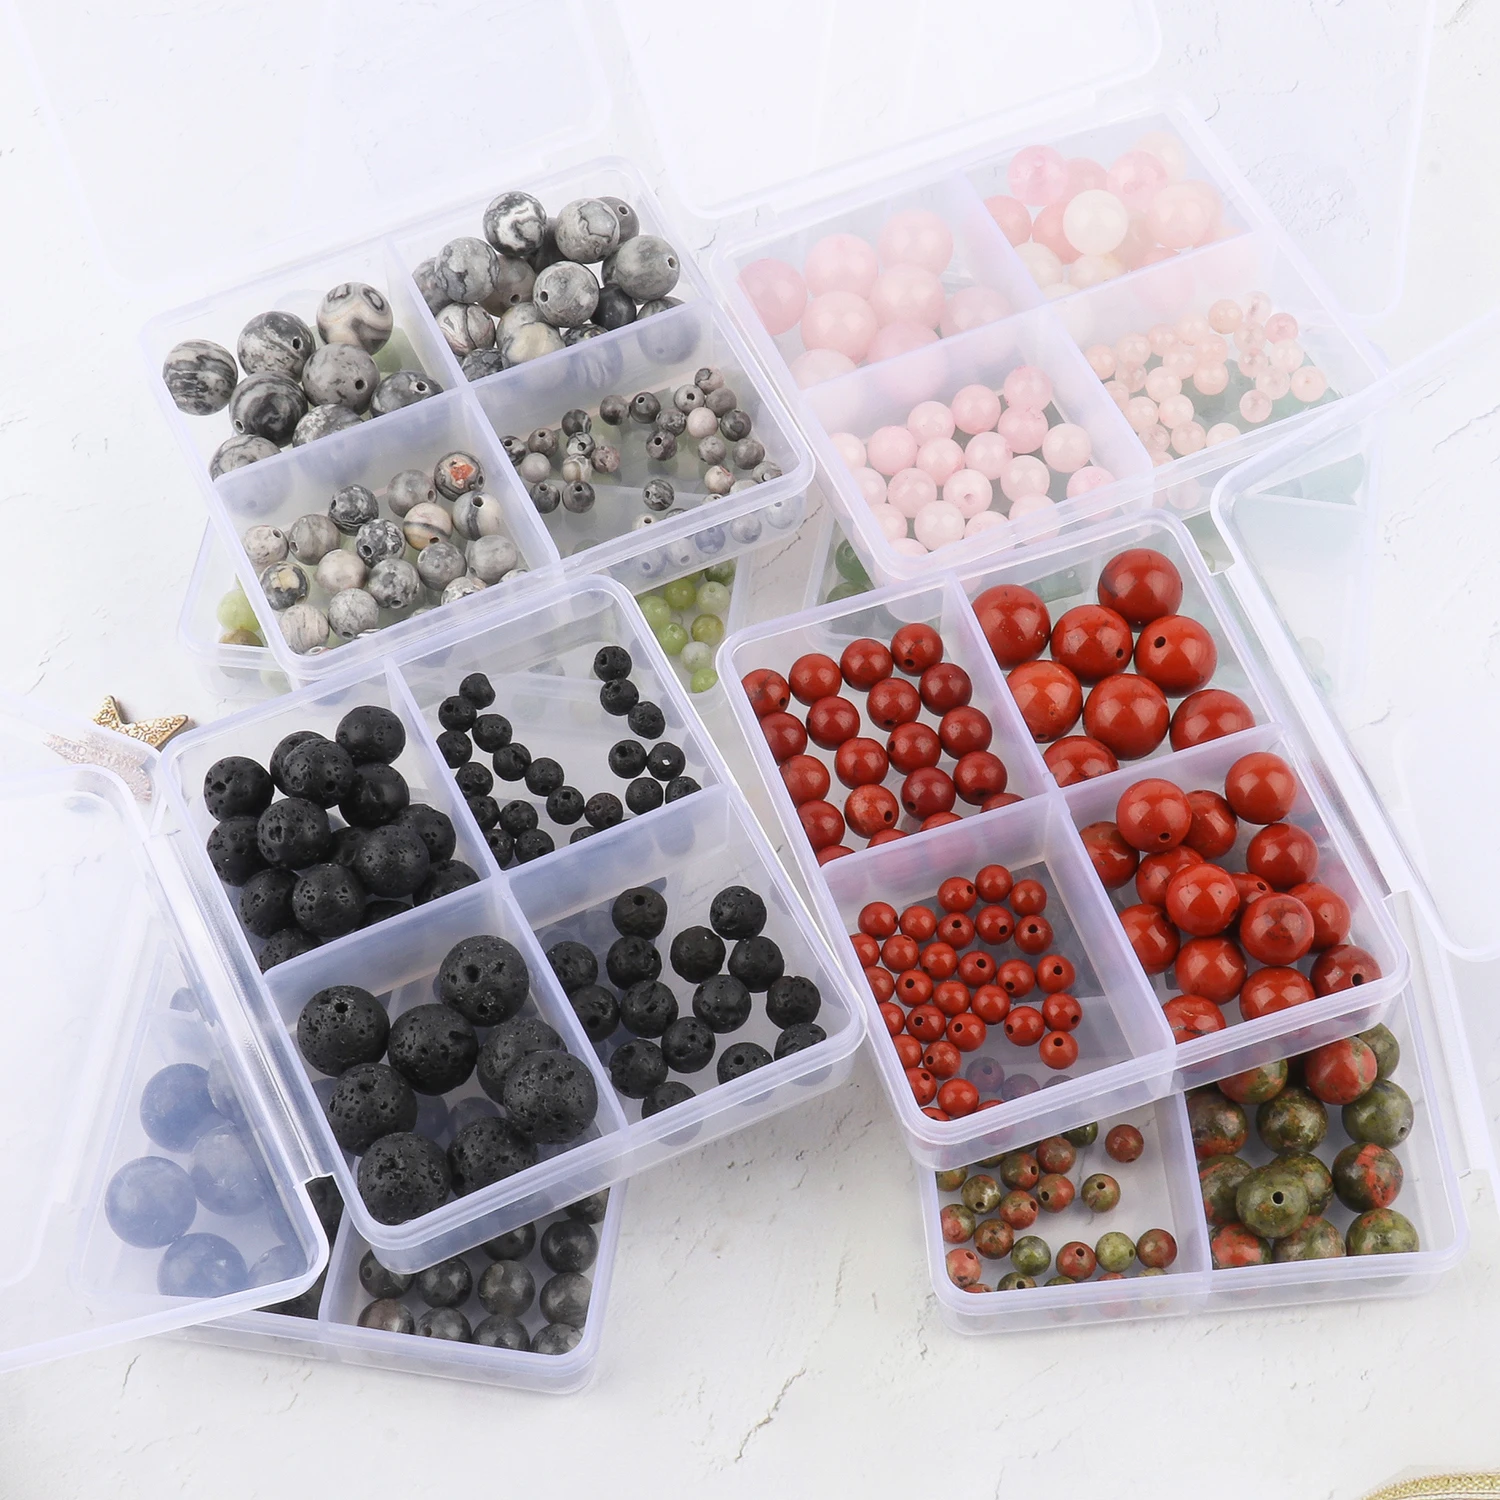 45 Types Boxed Beads Kits Polymer Clay Acrylic Letter Seed Beads Jewelry Making Kit Set Elastic Cord for Girls Kids DIY Bracelet